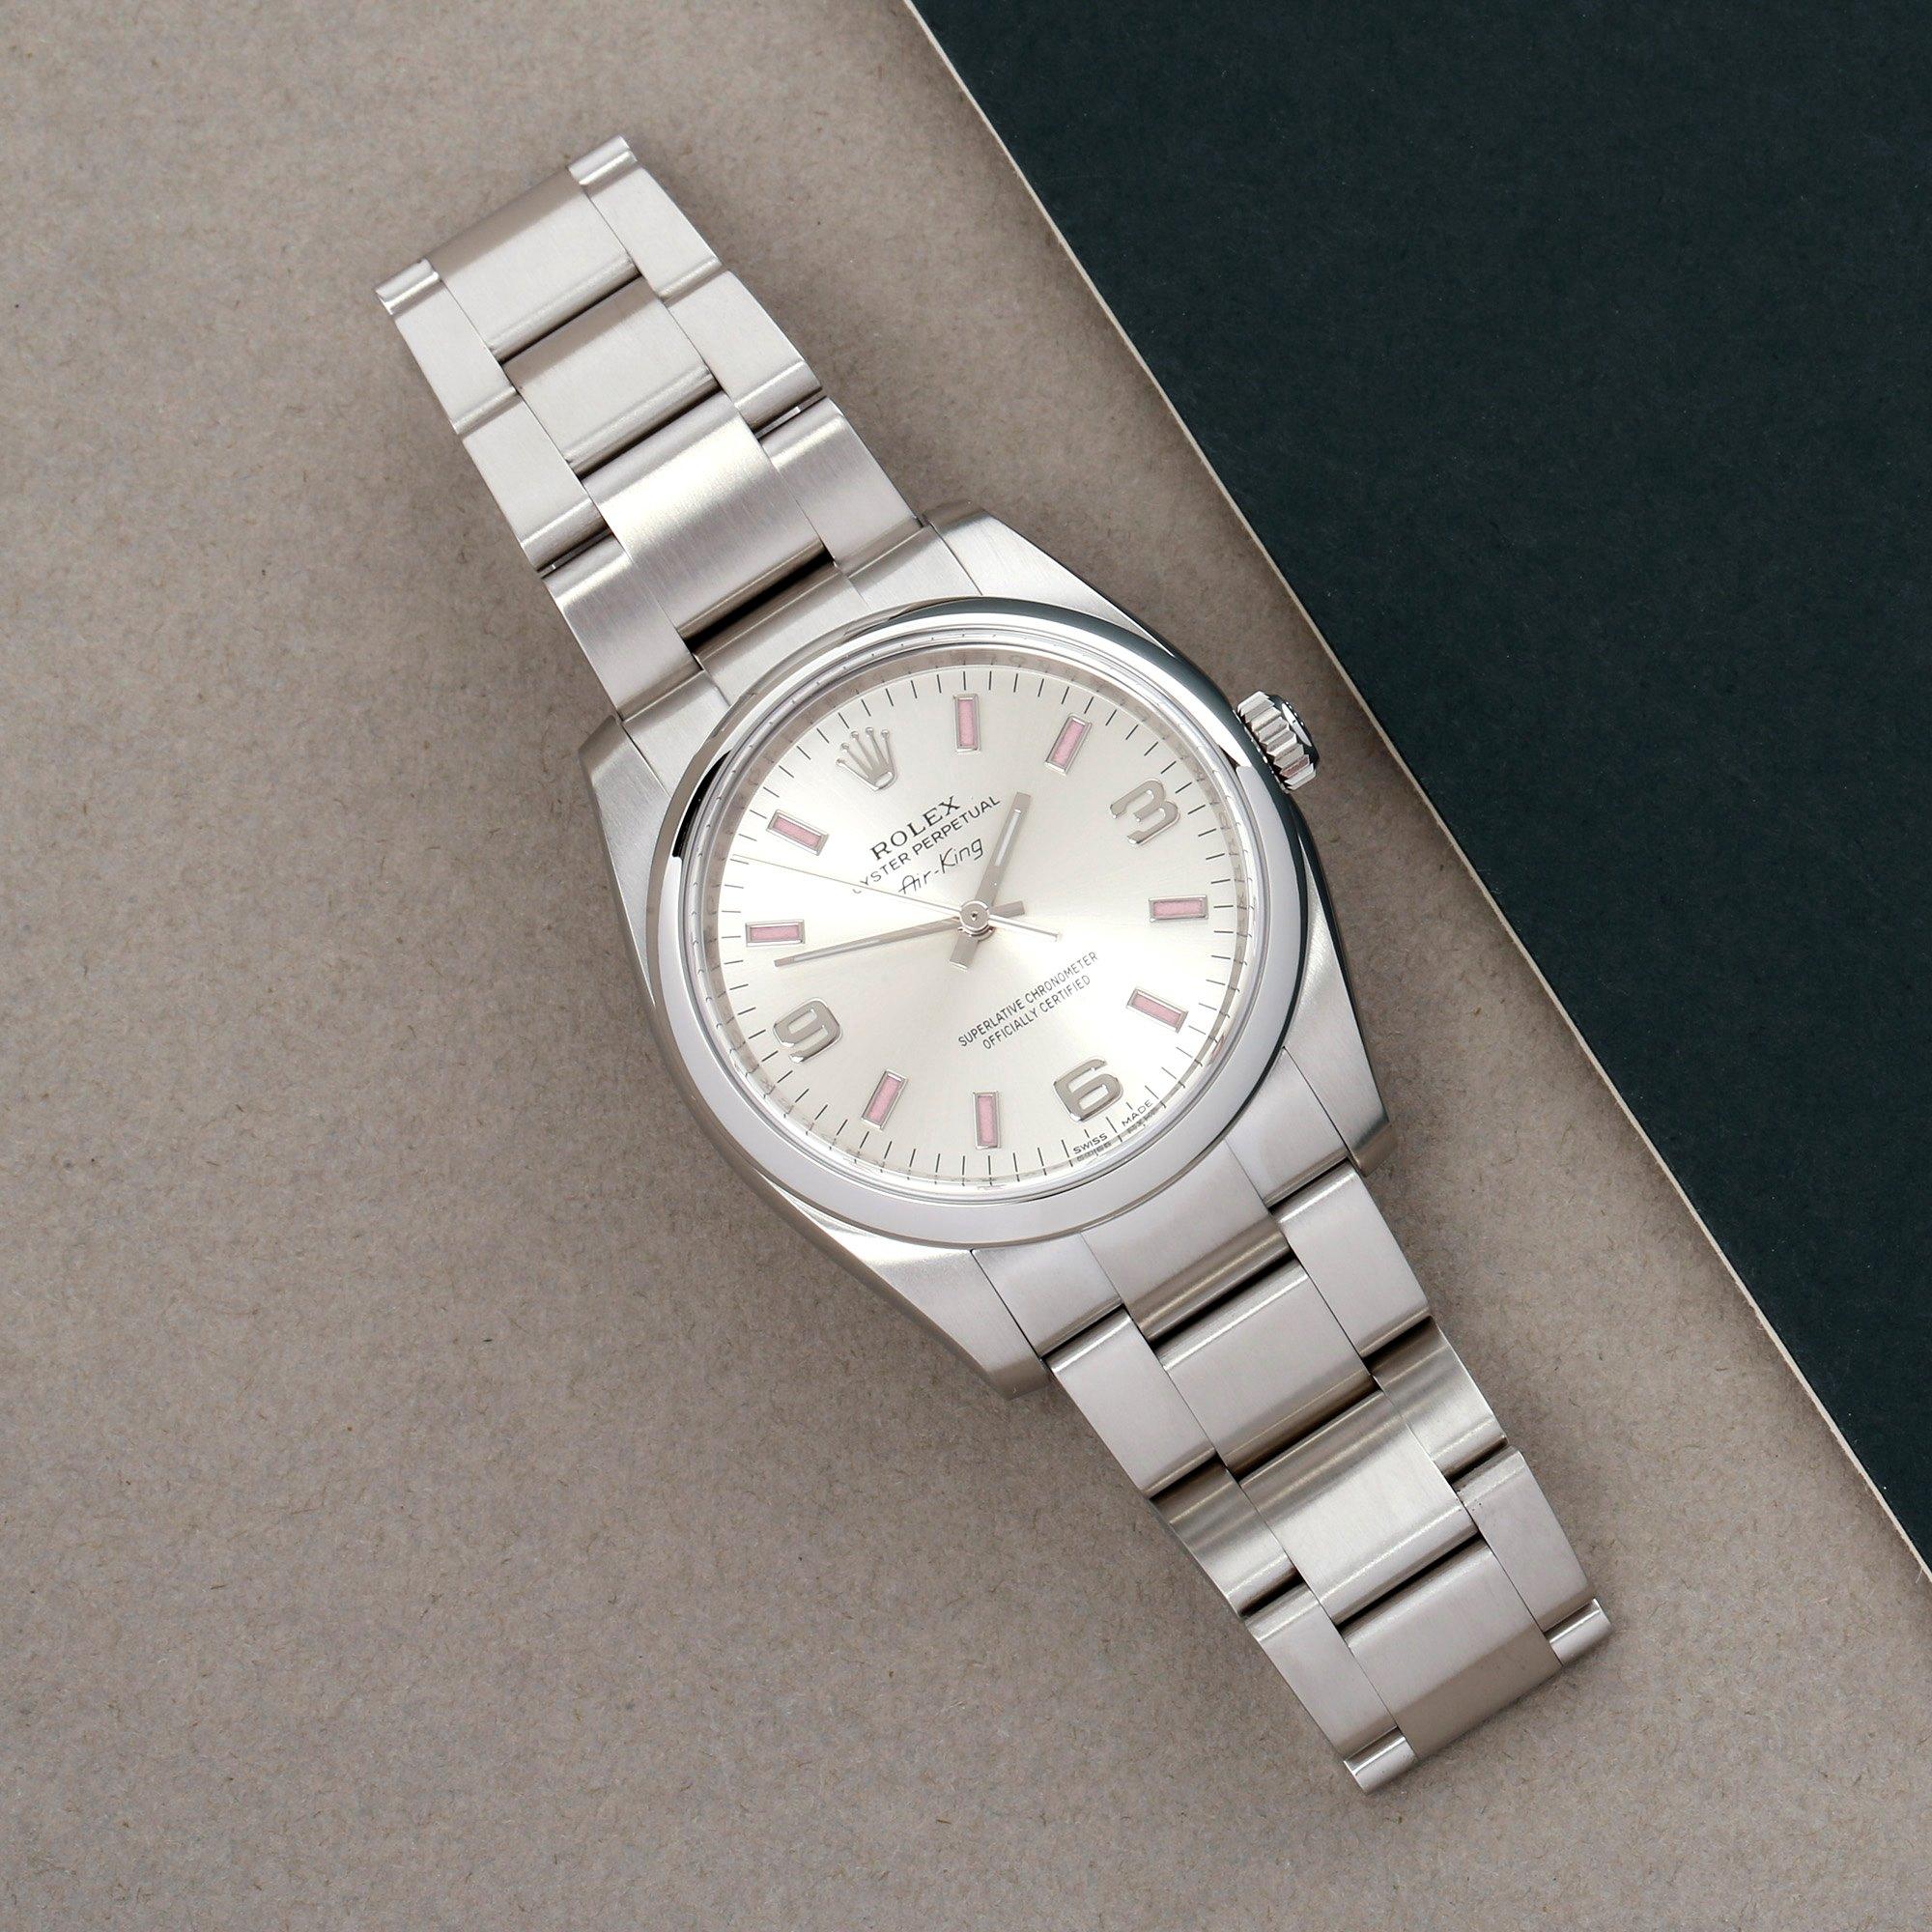 Xupes Reference: COM002720
Manufacturer: Rolex
Model: Air-King
Model Variant: 0
Model Number: 114200
Age: 2010
Gender: Unisex
Complete With: Rolex Box, Manuals, Card Holder &  Open Guarantee 
Dial: Silver Quarter Arabic 
Glass: Sapphire Crystal
Case